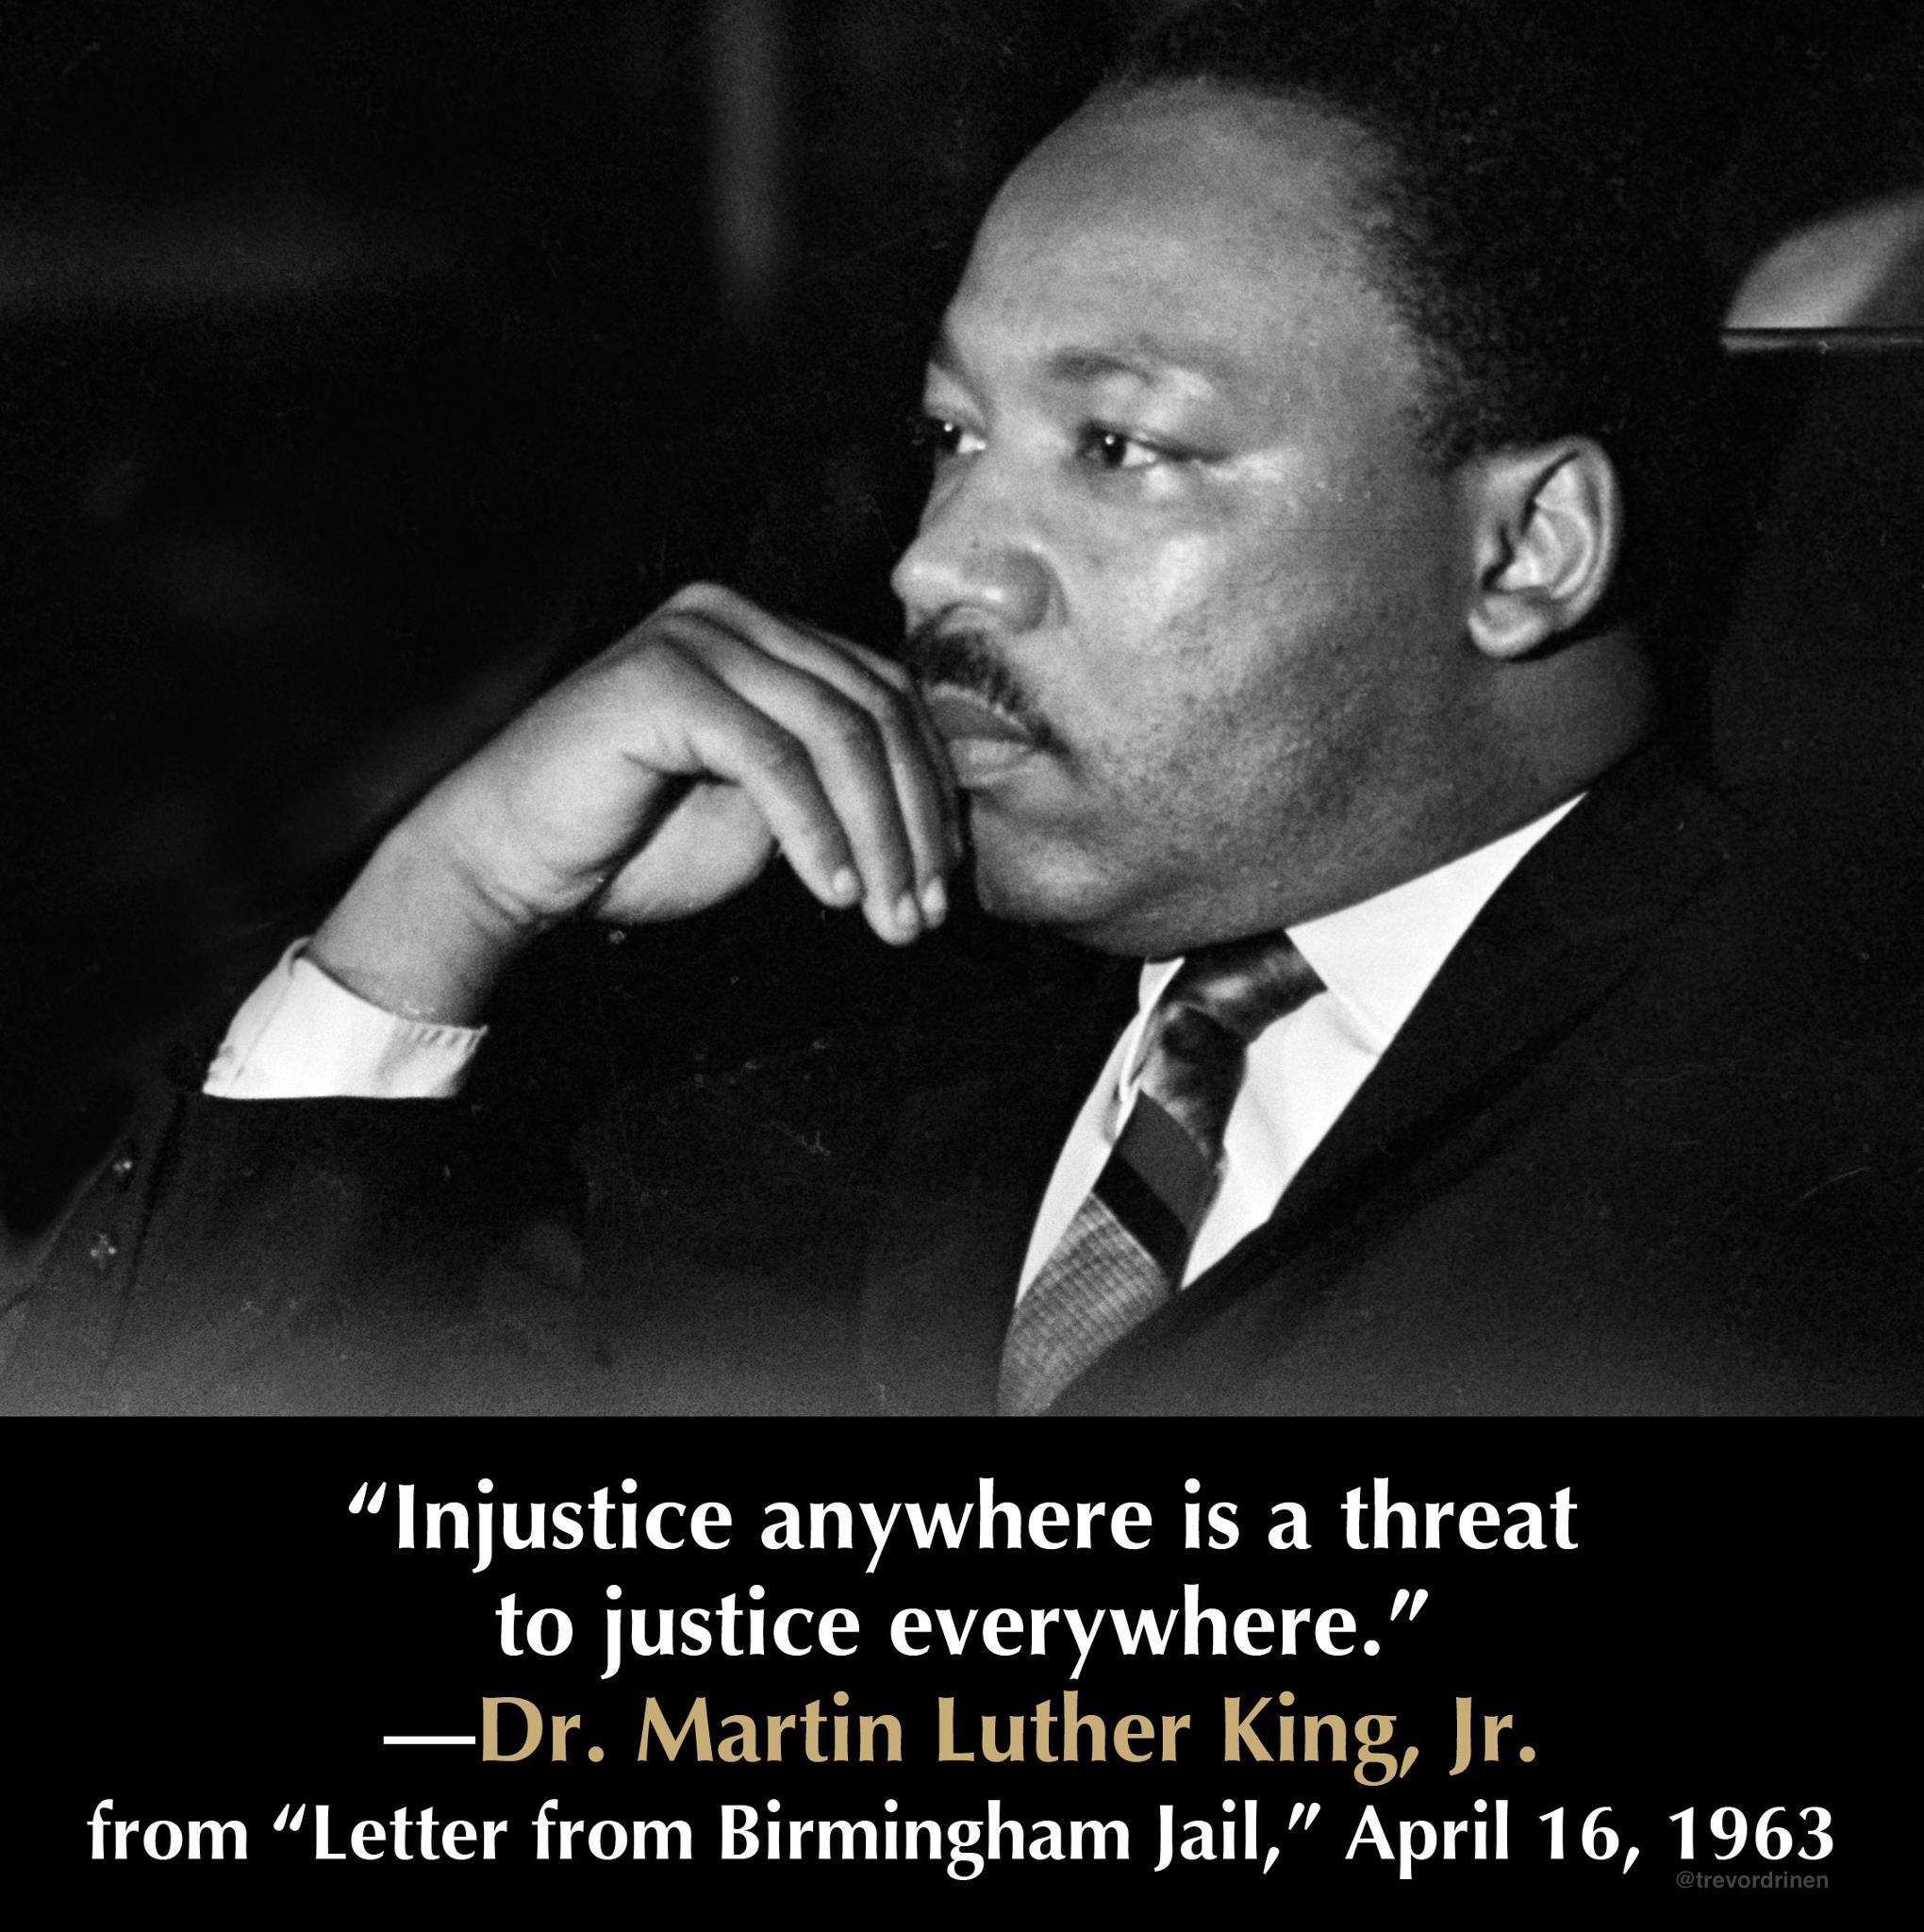 Martin Luther King Jr. 9 Inspirational Wallpaper & quotes